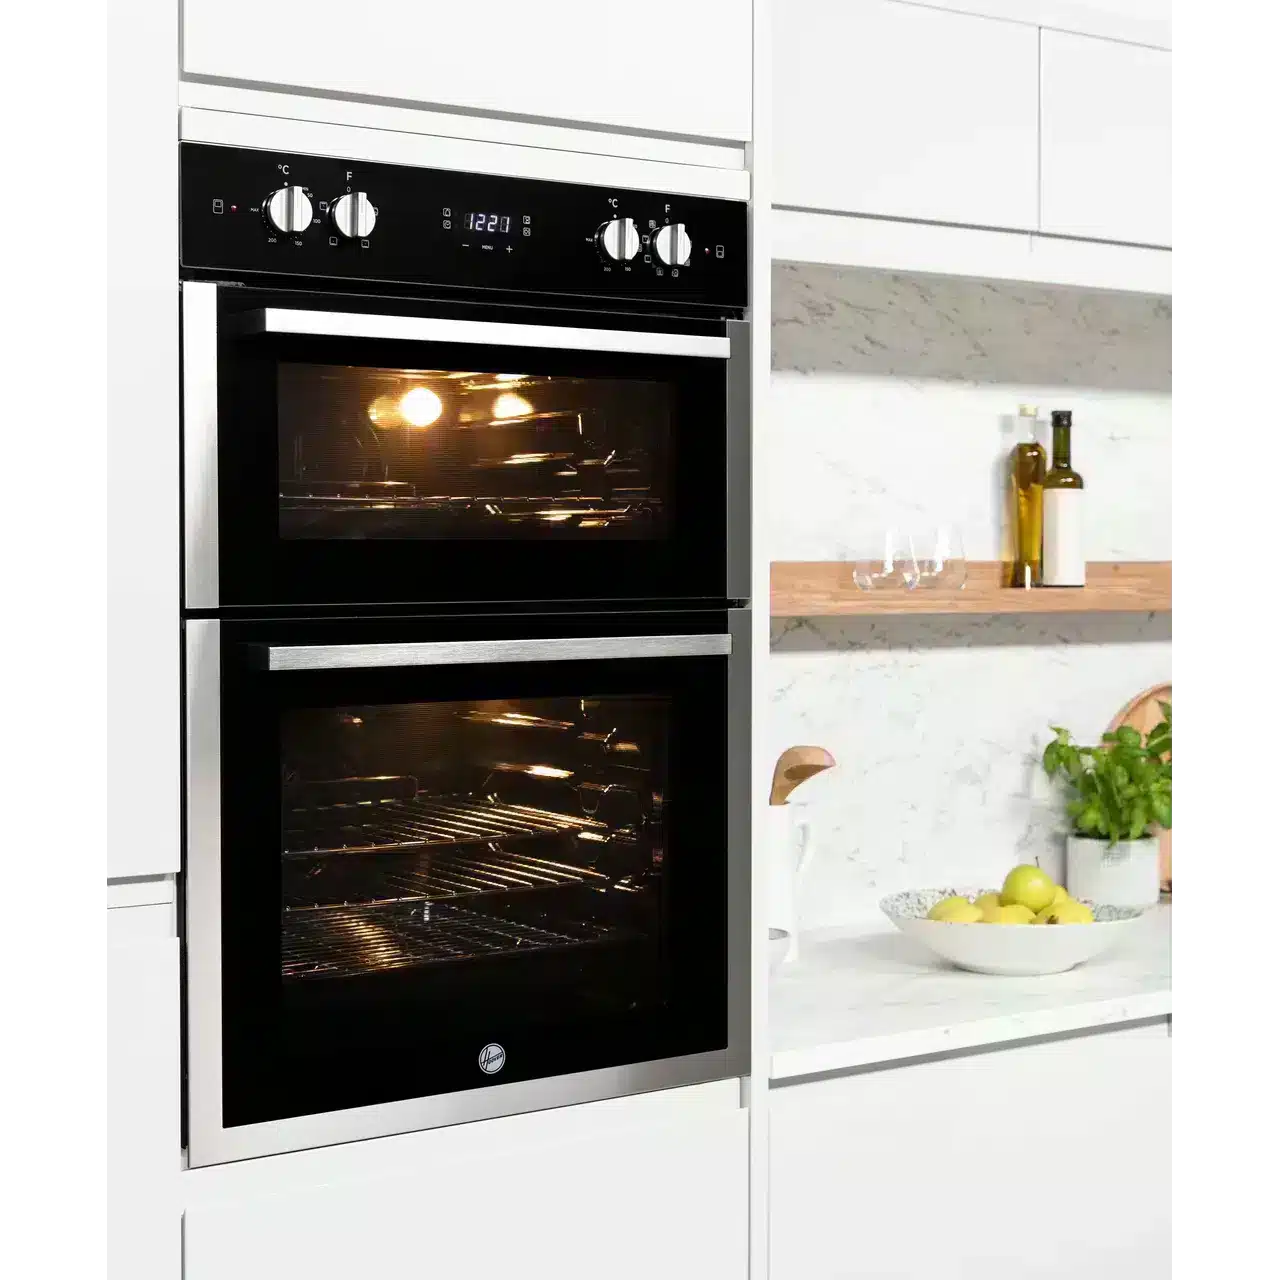 Hoover Electric Double Oven Built In Stainless Steel-65L/42L-Black-HO9DC3UB308BI X-Display 60